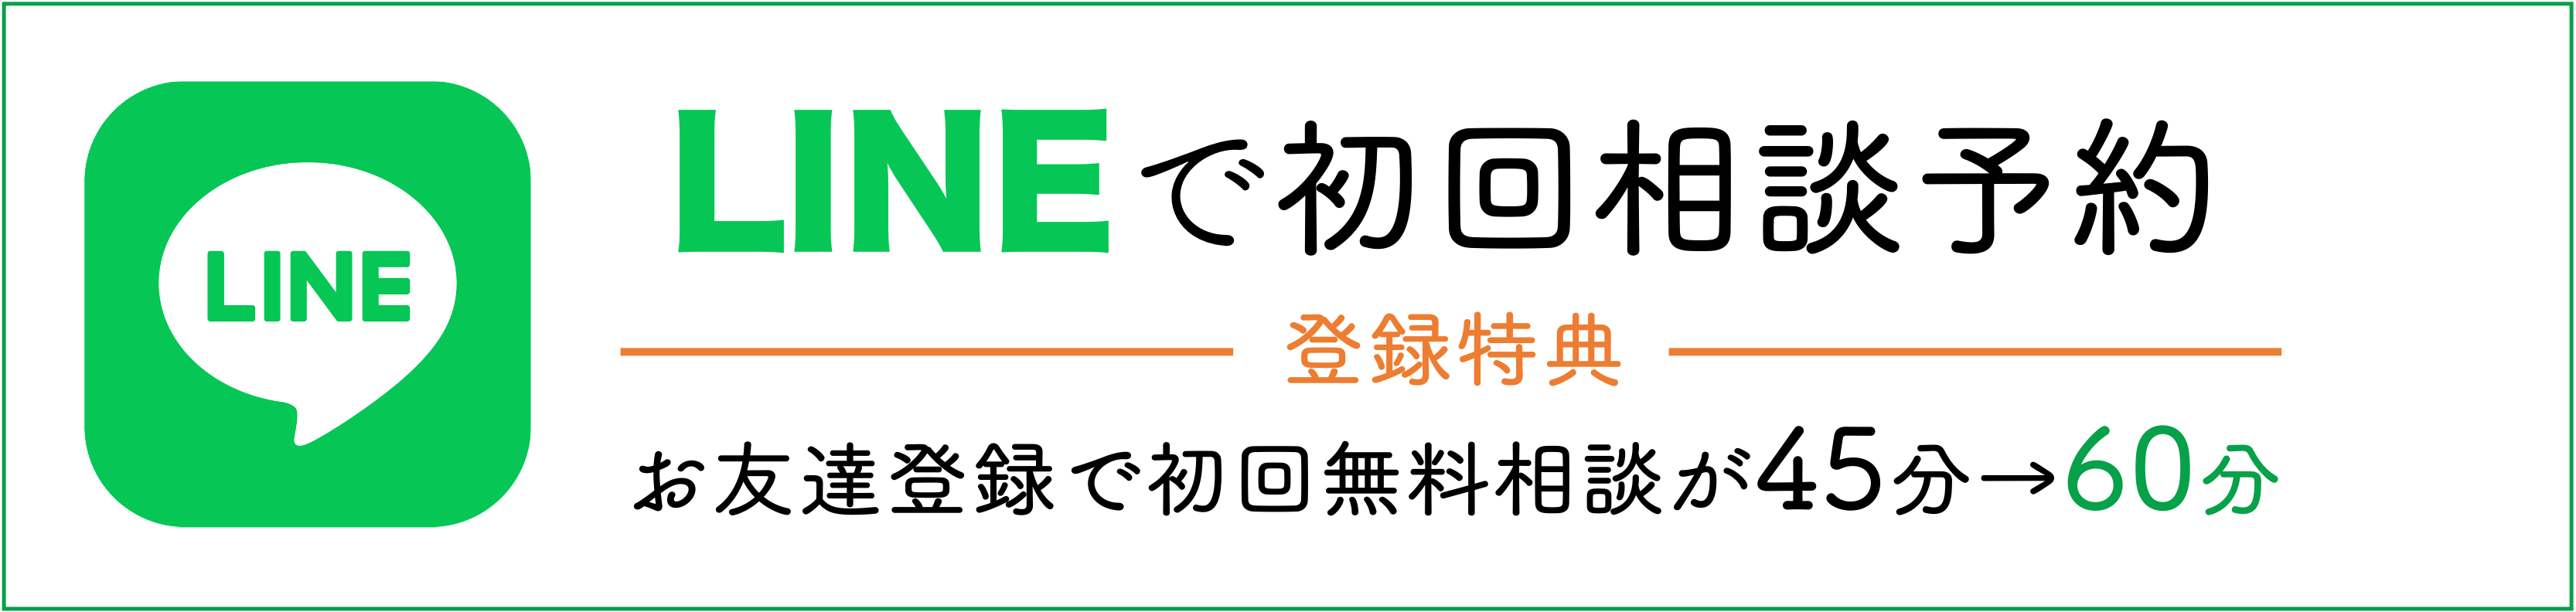 LINEで相談予約バナー_新宿